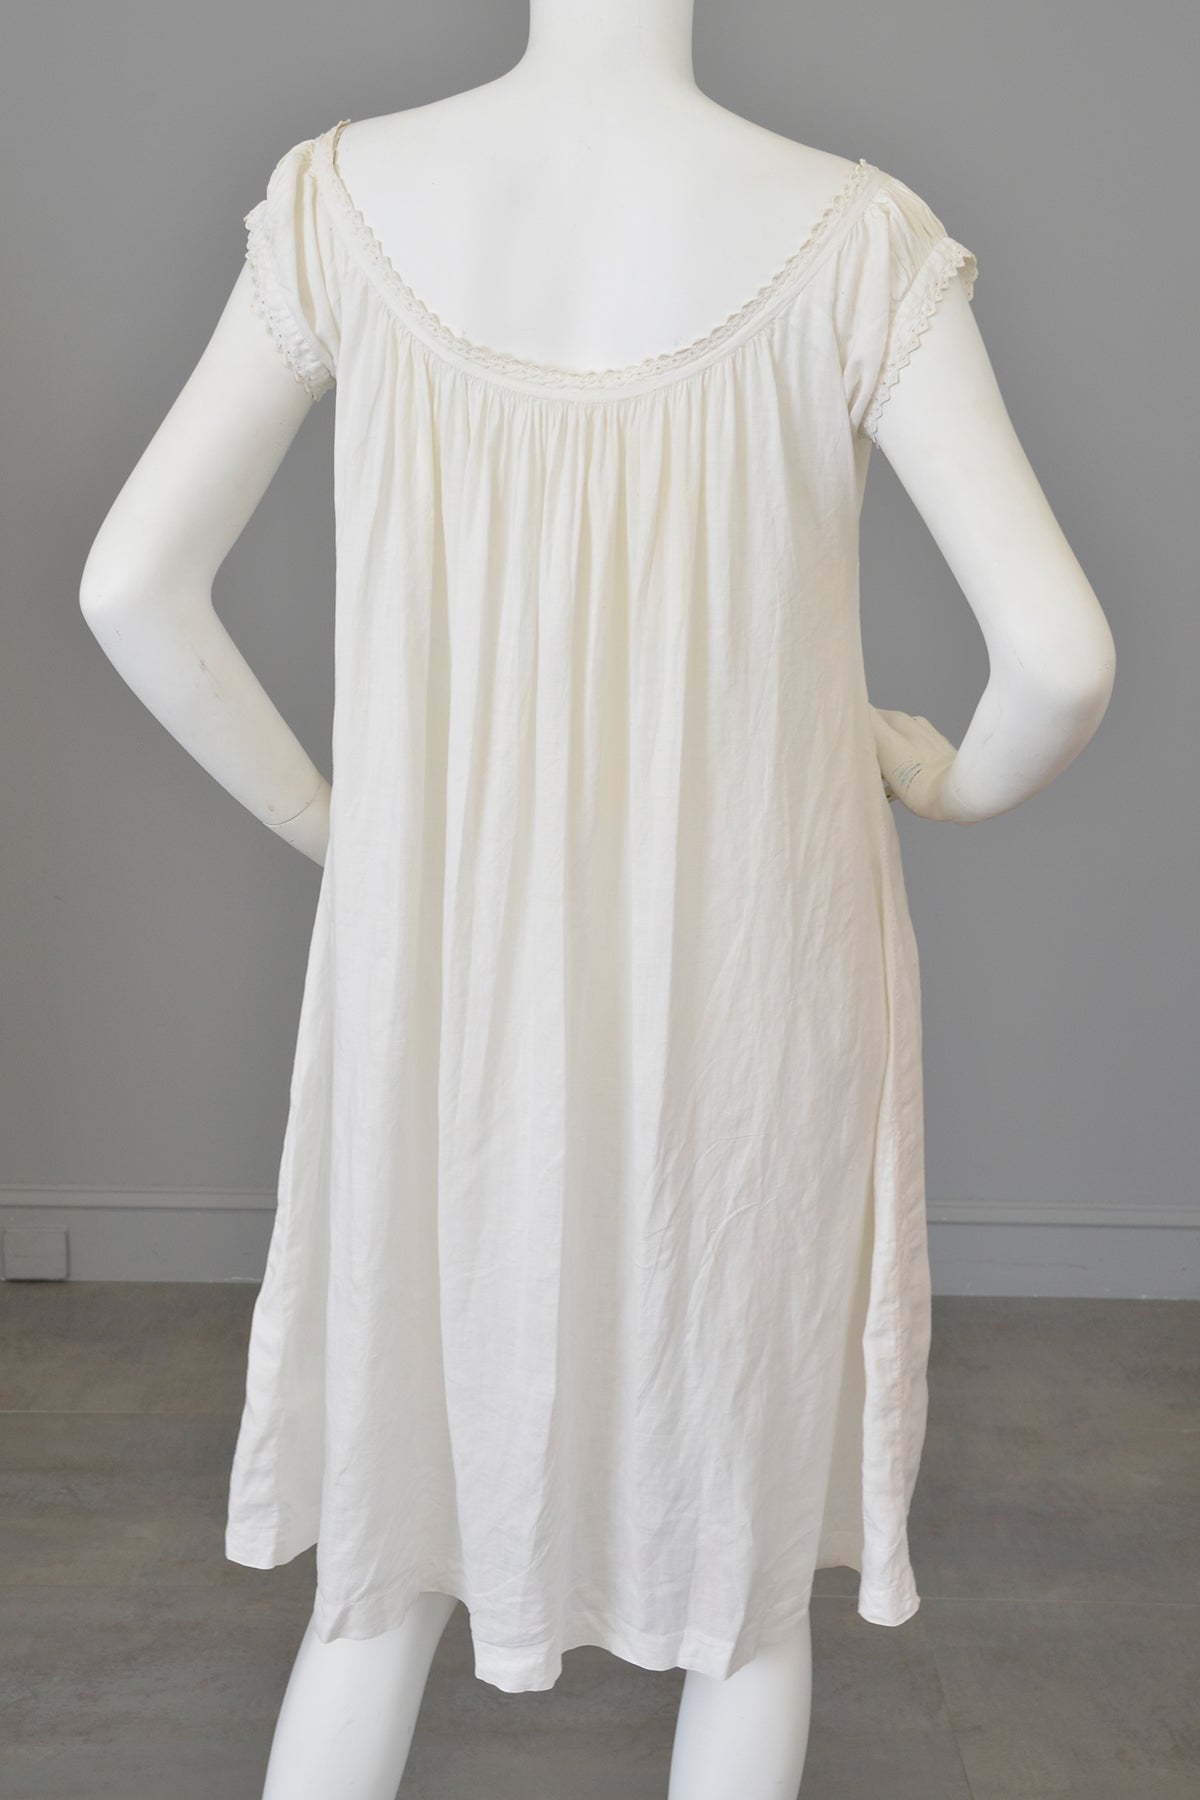 1930s White Linen/Flax Trapeze Peasant Nightie Dress | 1930s Peasant Style Dress